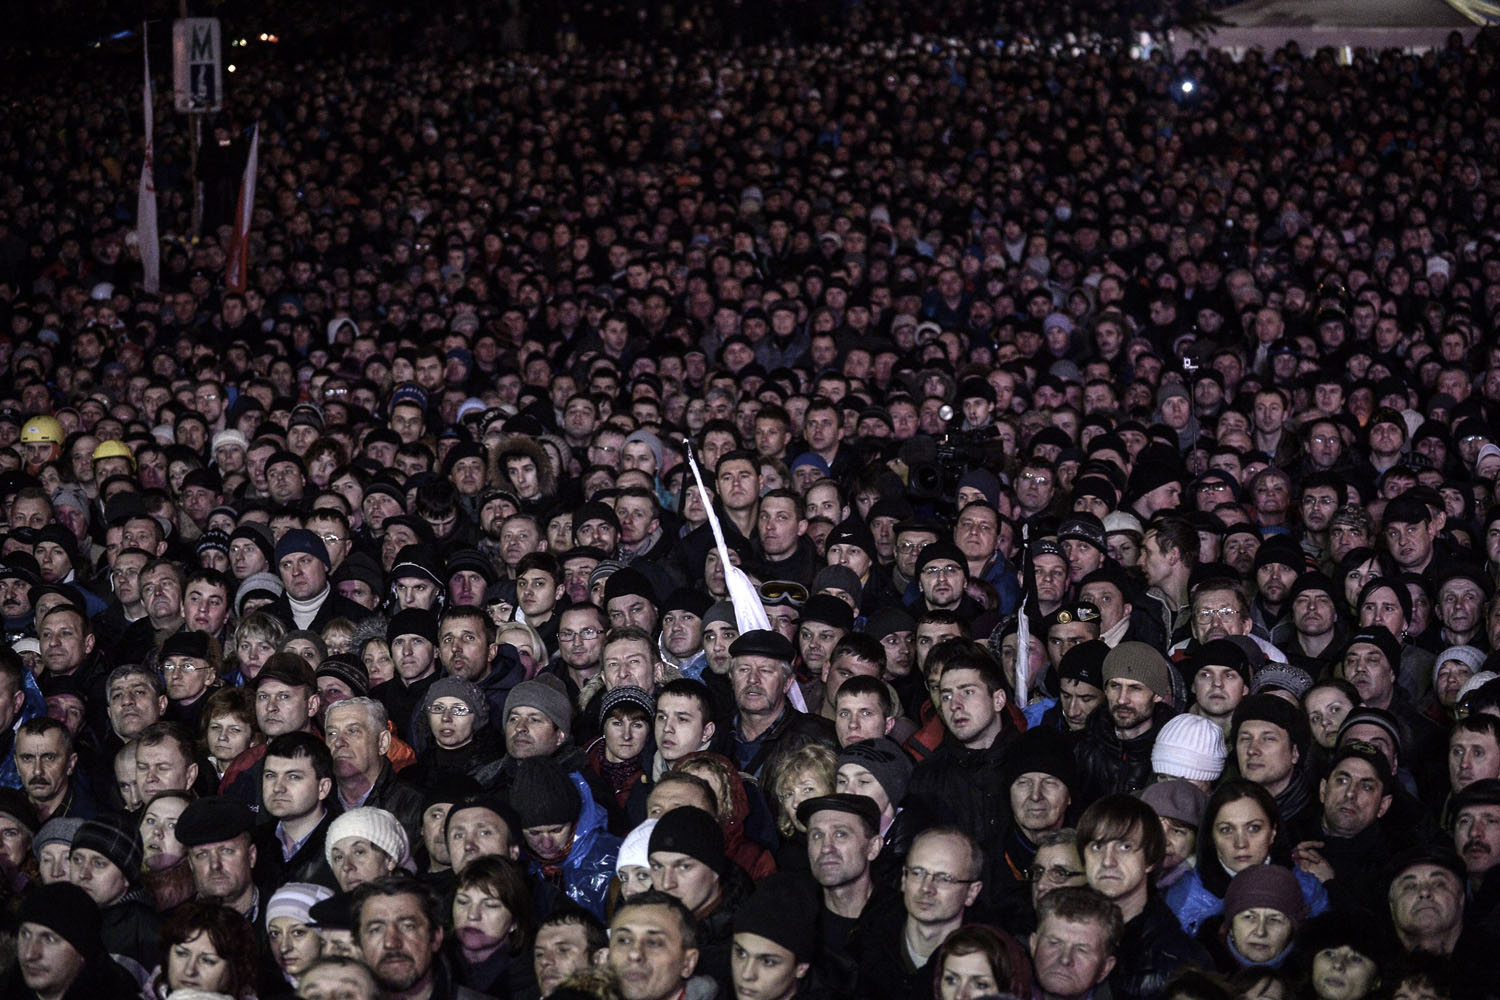 A crowd of people attend a rally at Independence Square in Kiev, Ukraine, Feb. 22, 2014.